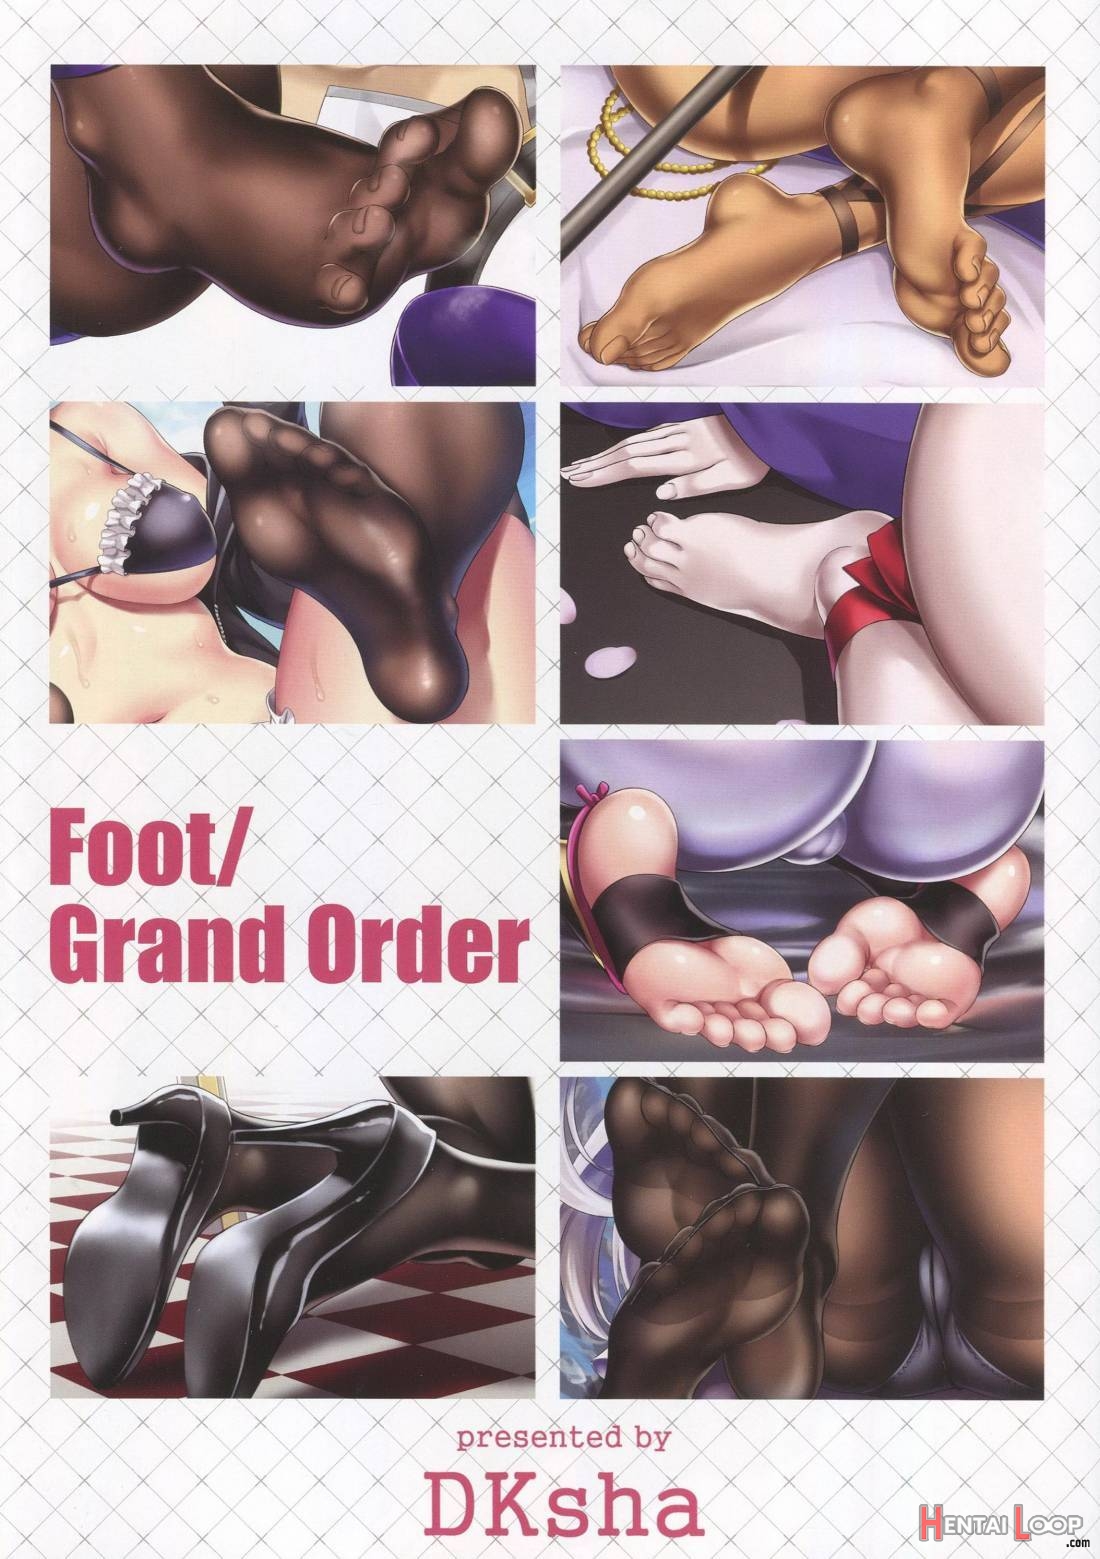 Foot/Grand Order page 2